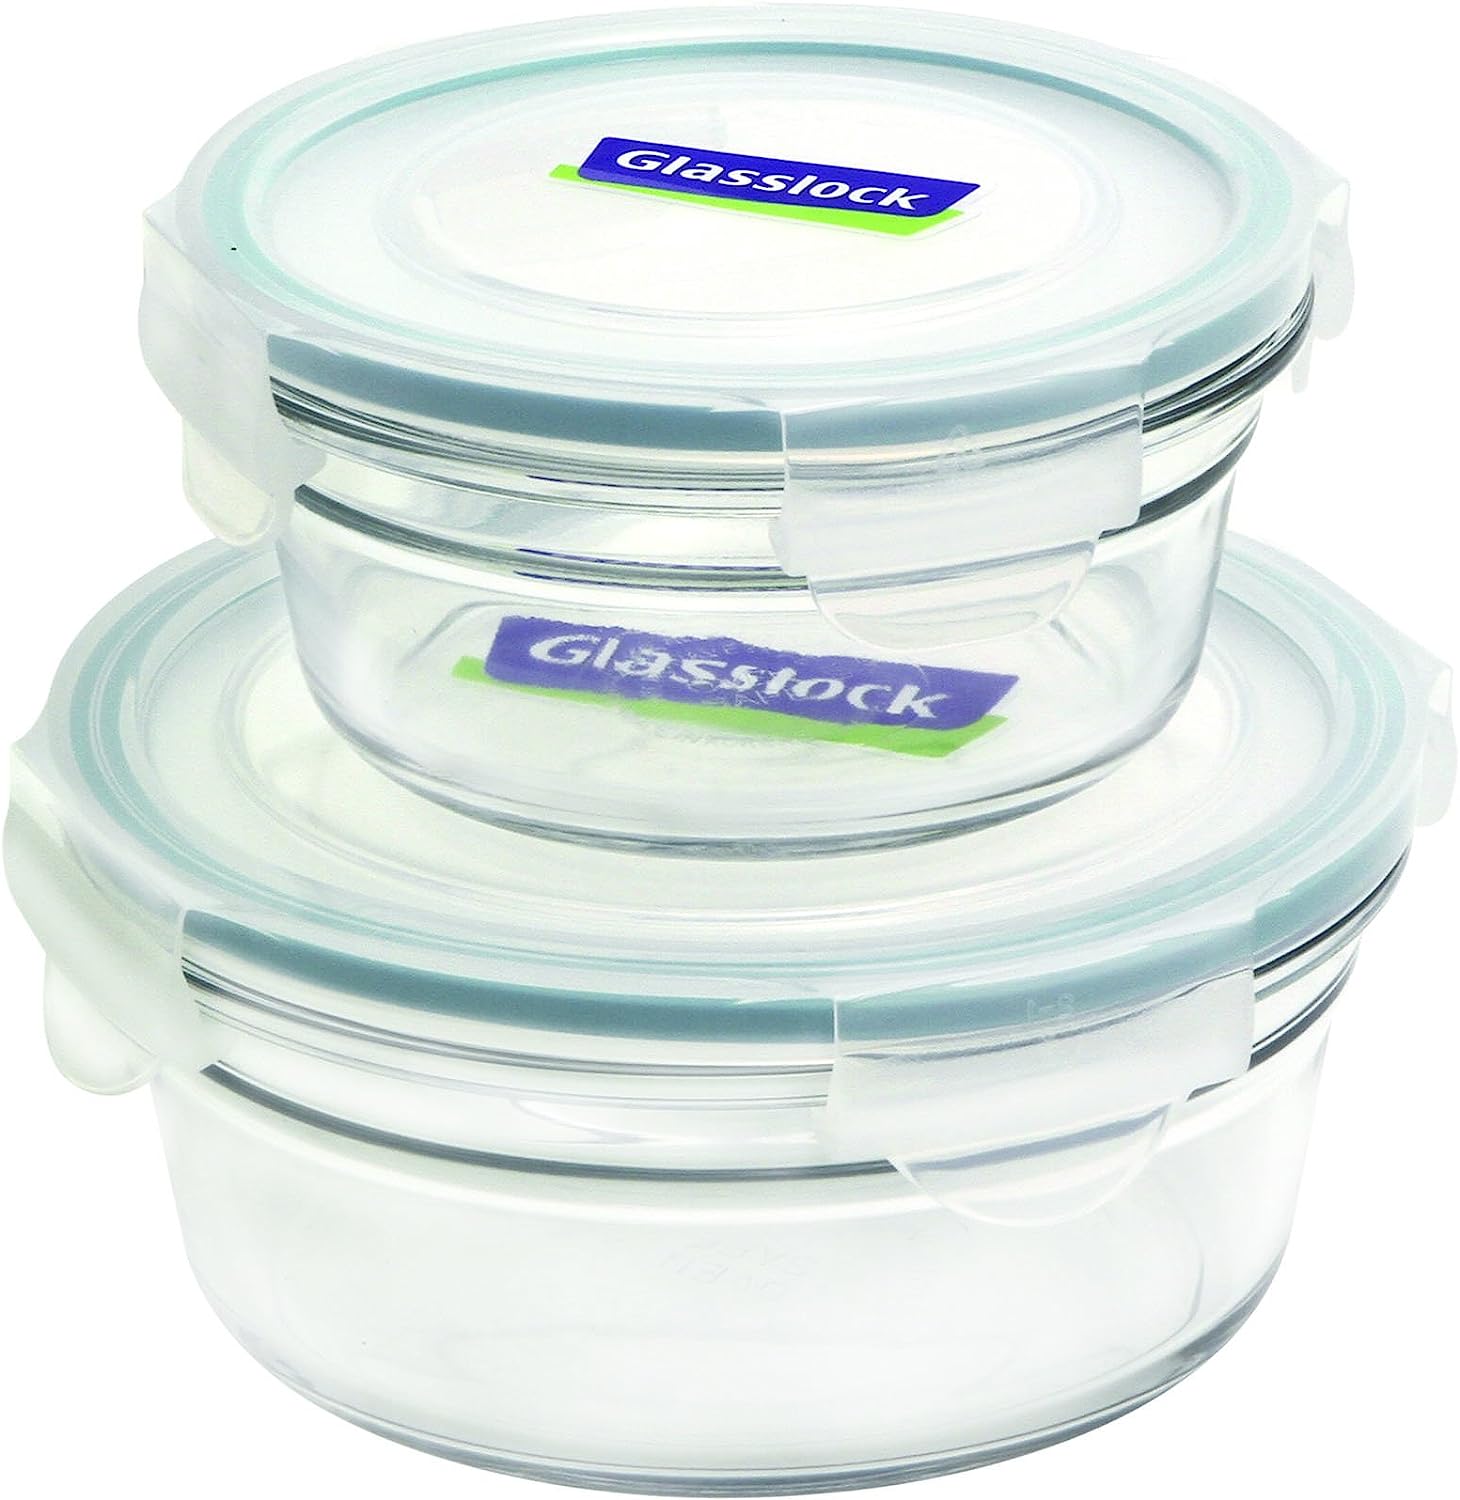 Glasslock 4-Piece Round Oven Safe Containers Set